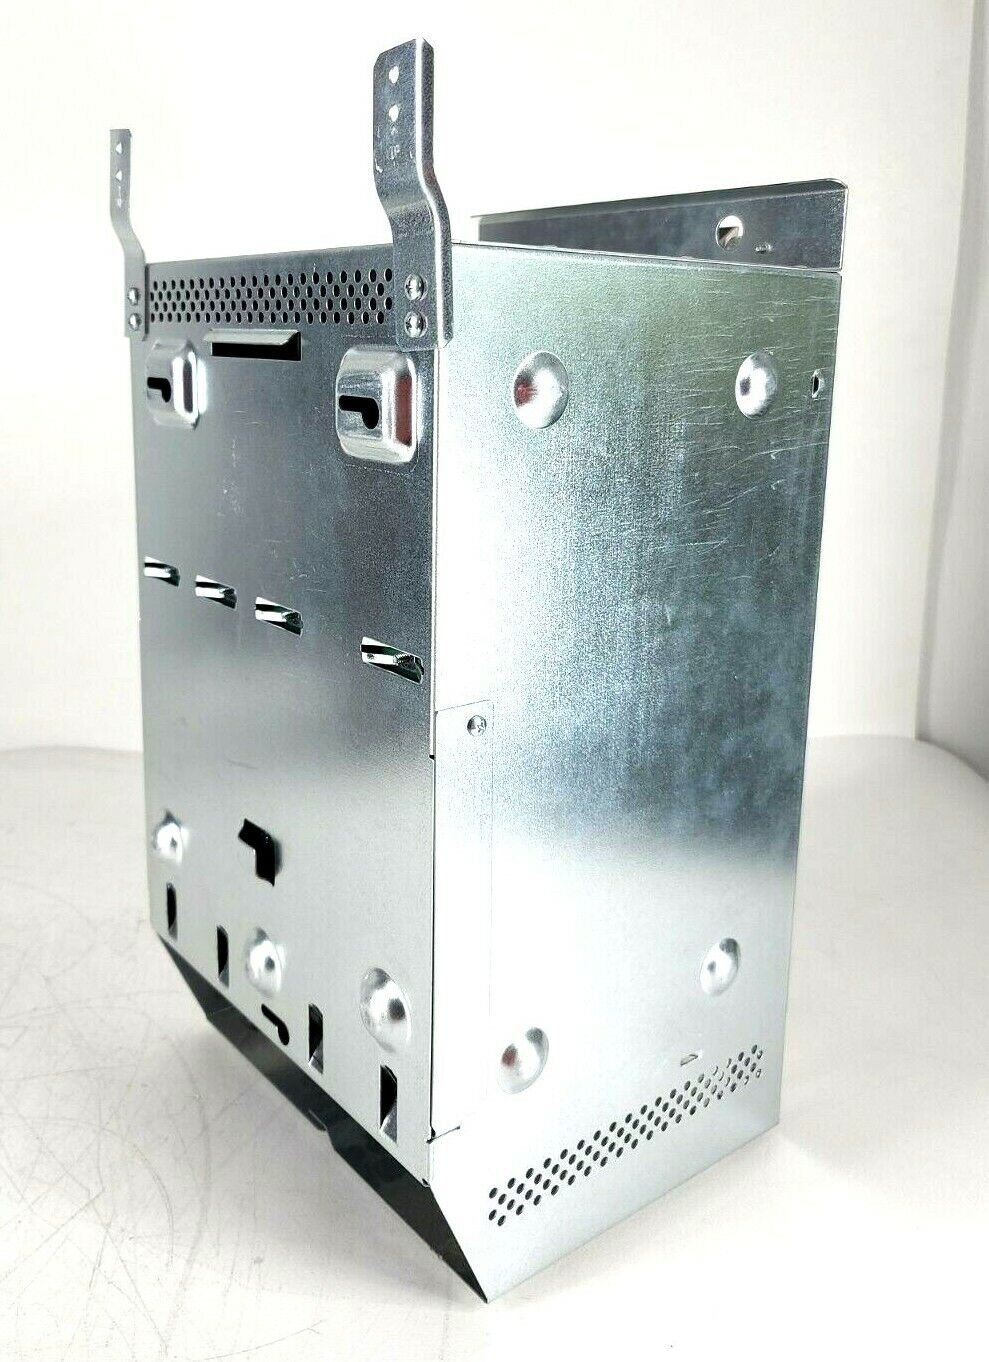 Lucent Avaya Merlin Magix Expansion Cabinet Carrier 491E1 No cover w/ 6 cards